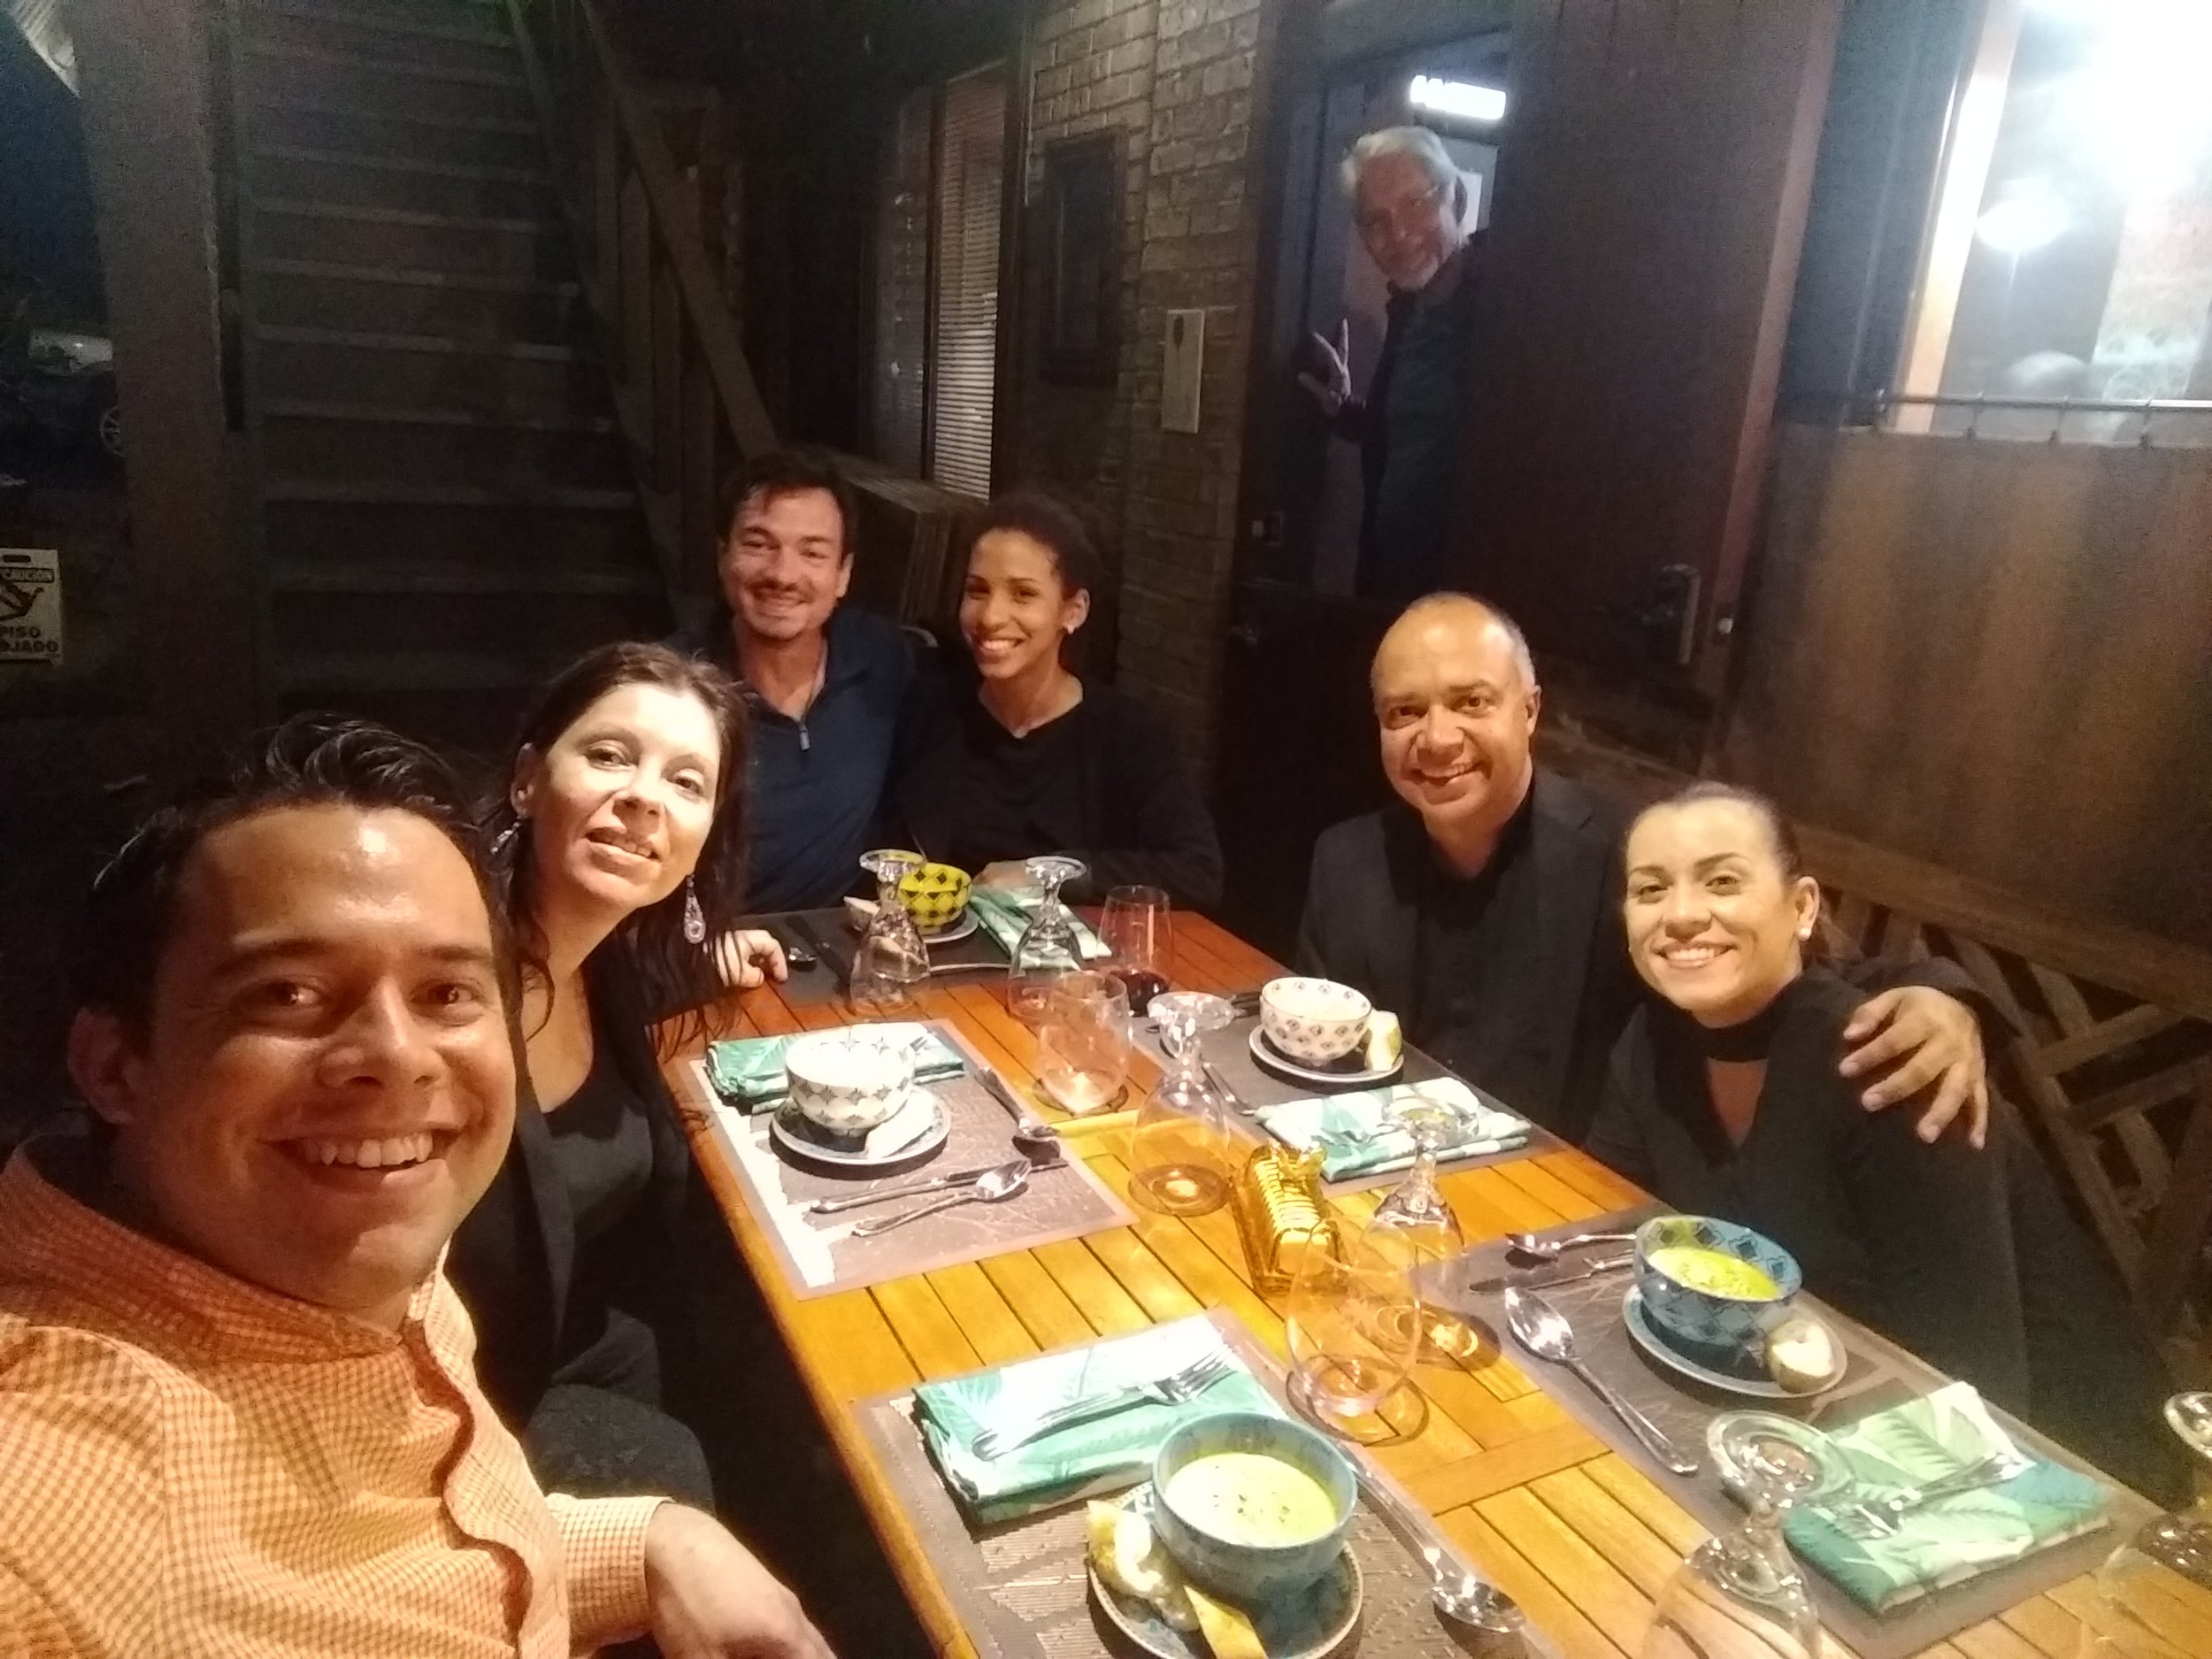  A photo of all performers! (Left to right: Reisaac Colón, Veronica Pellegrini, Robert Egan, Lilliana Marrero Solís, Luis Miguel Rojas, Rosa Sierra…and Bill in the background) 